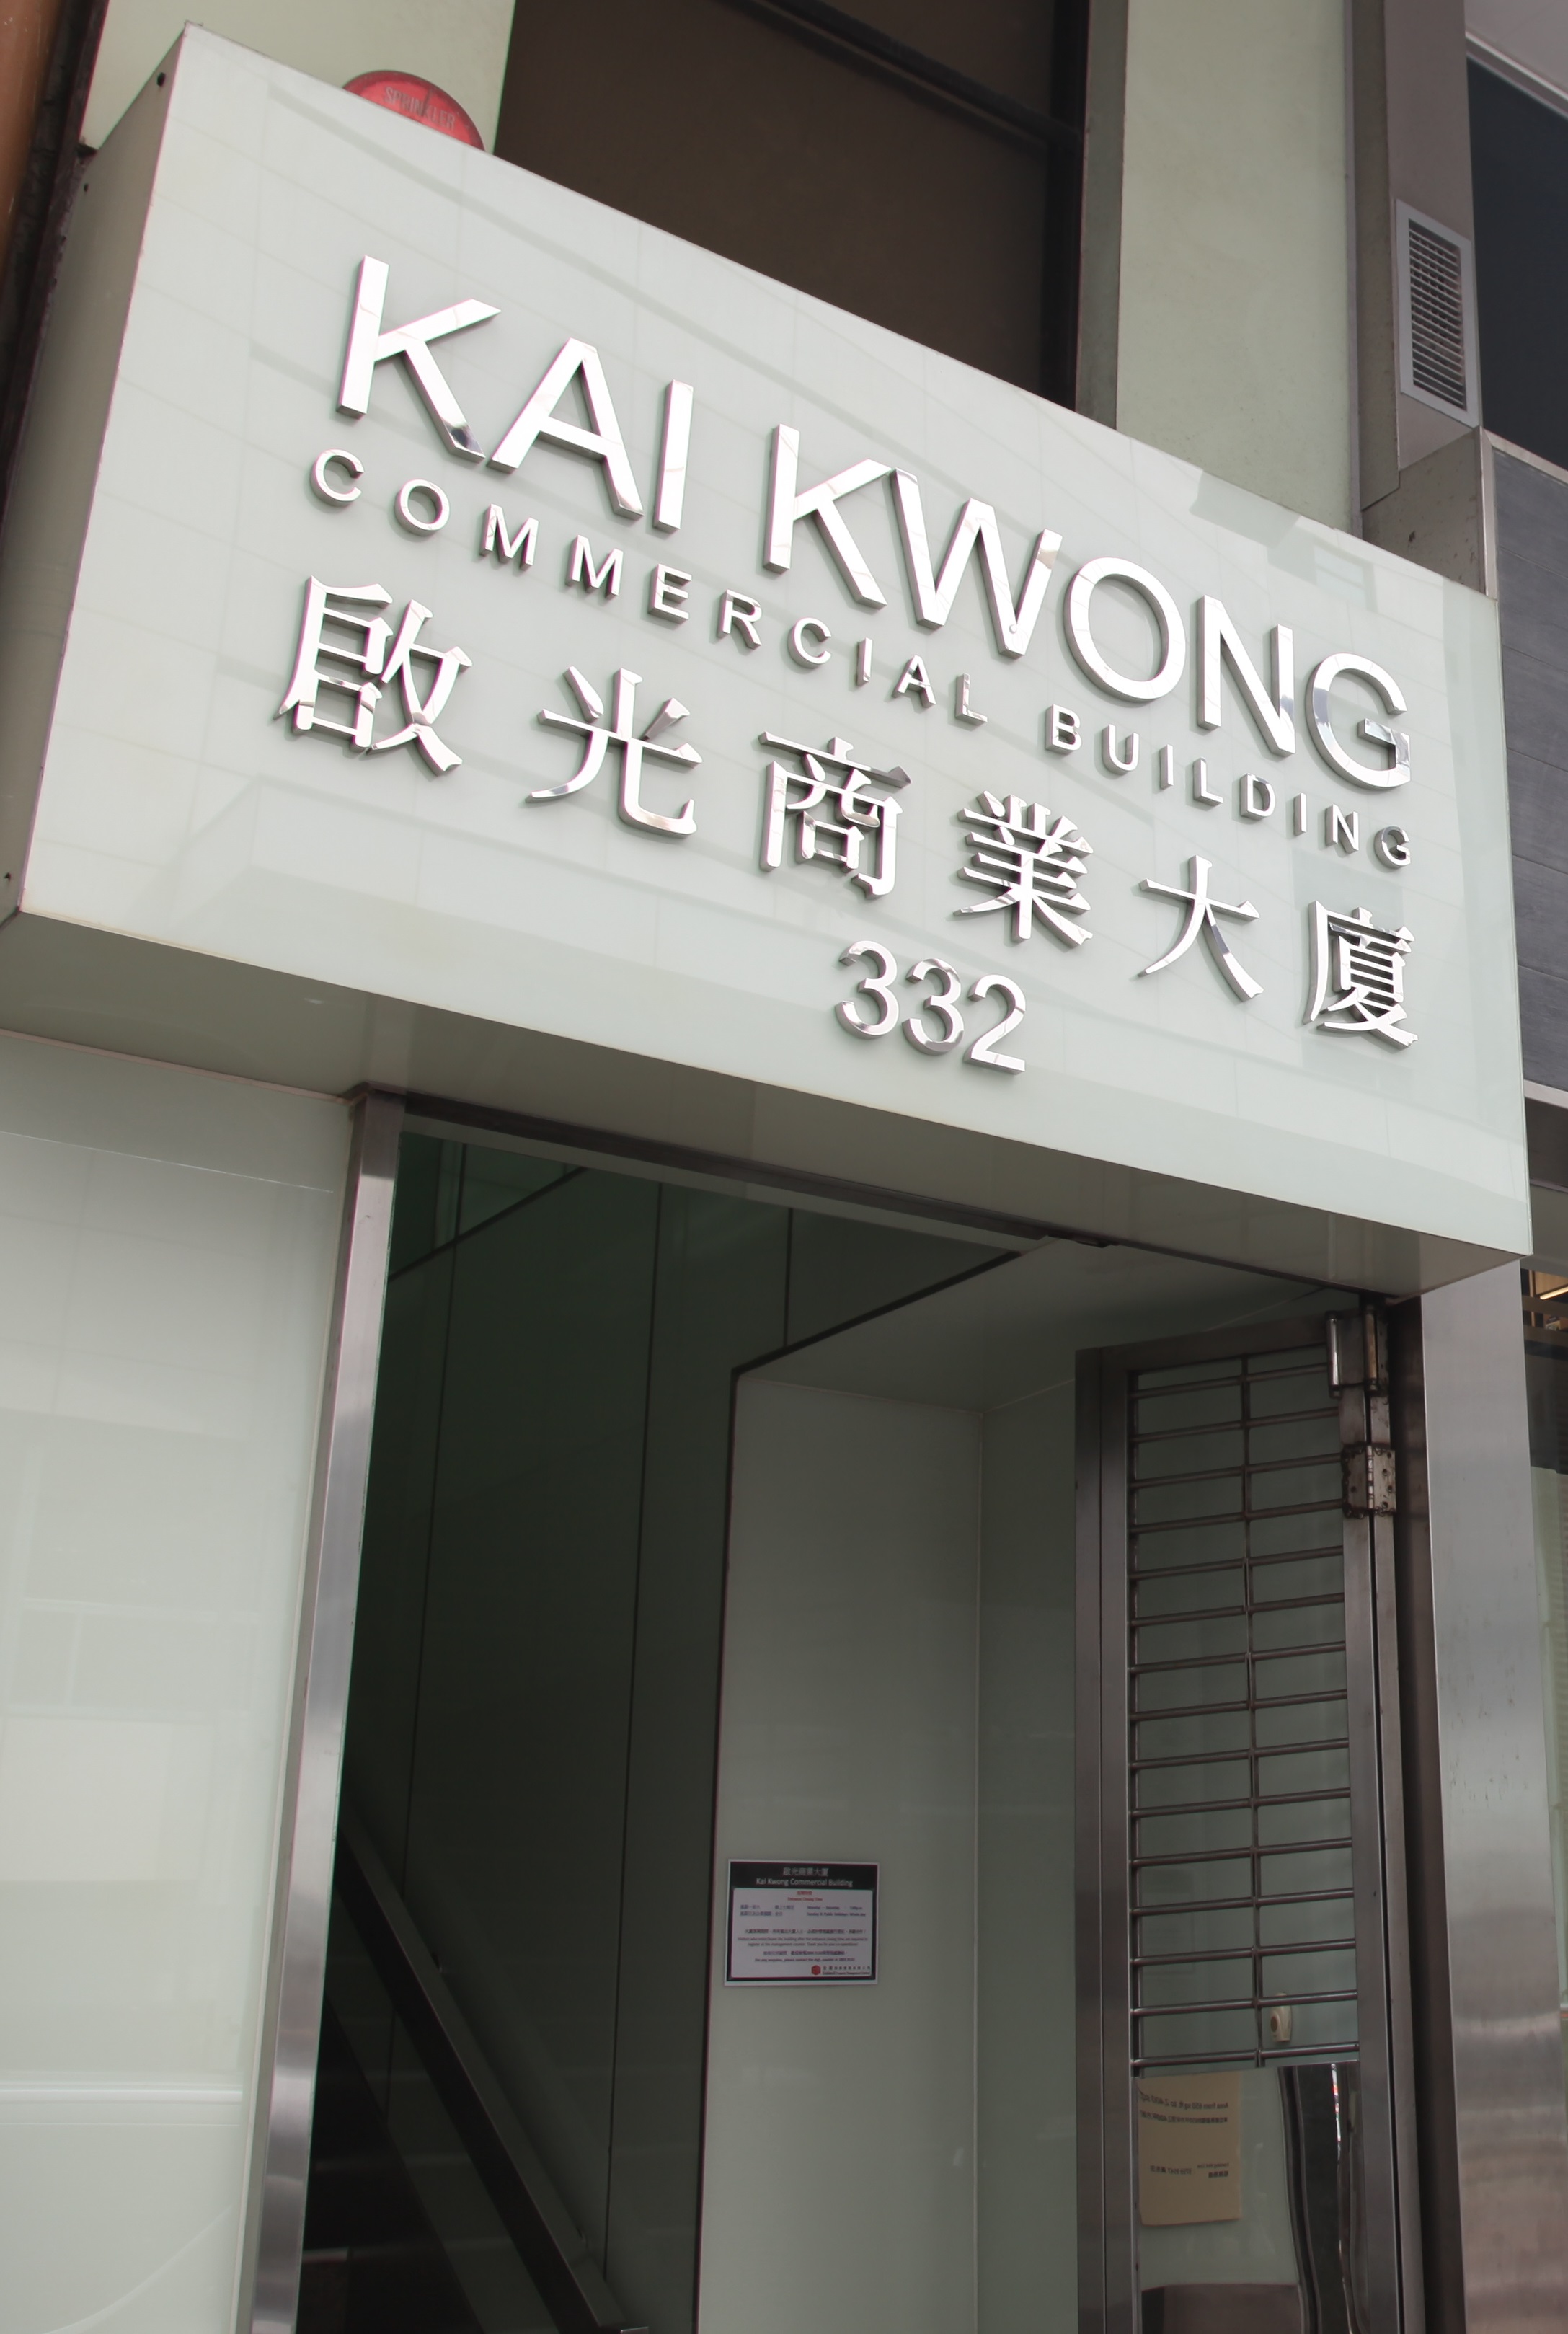 Kai Kwong Commercial Building